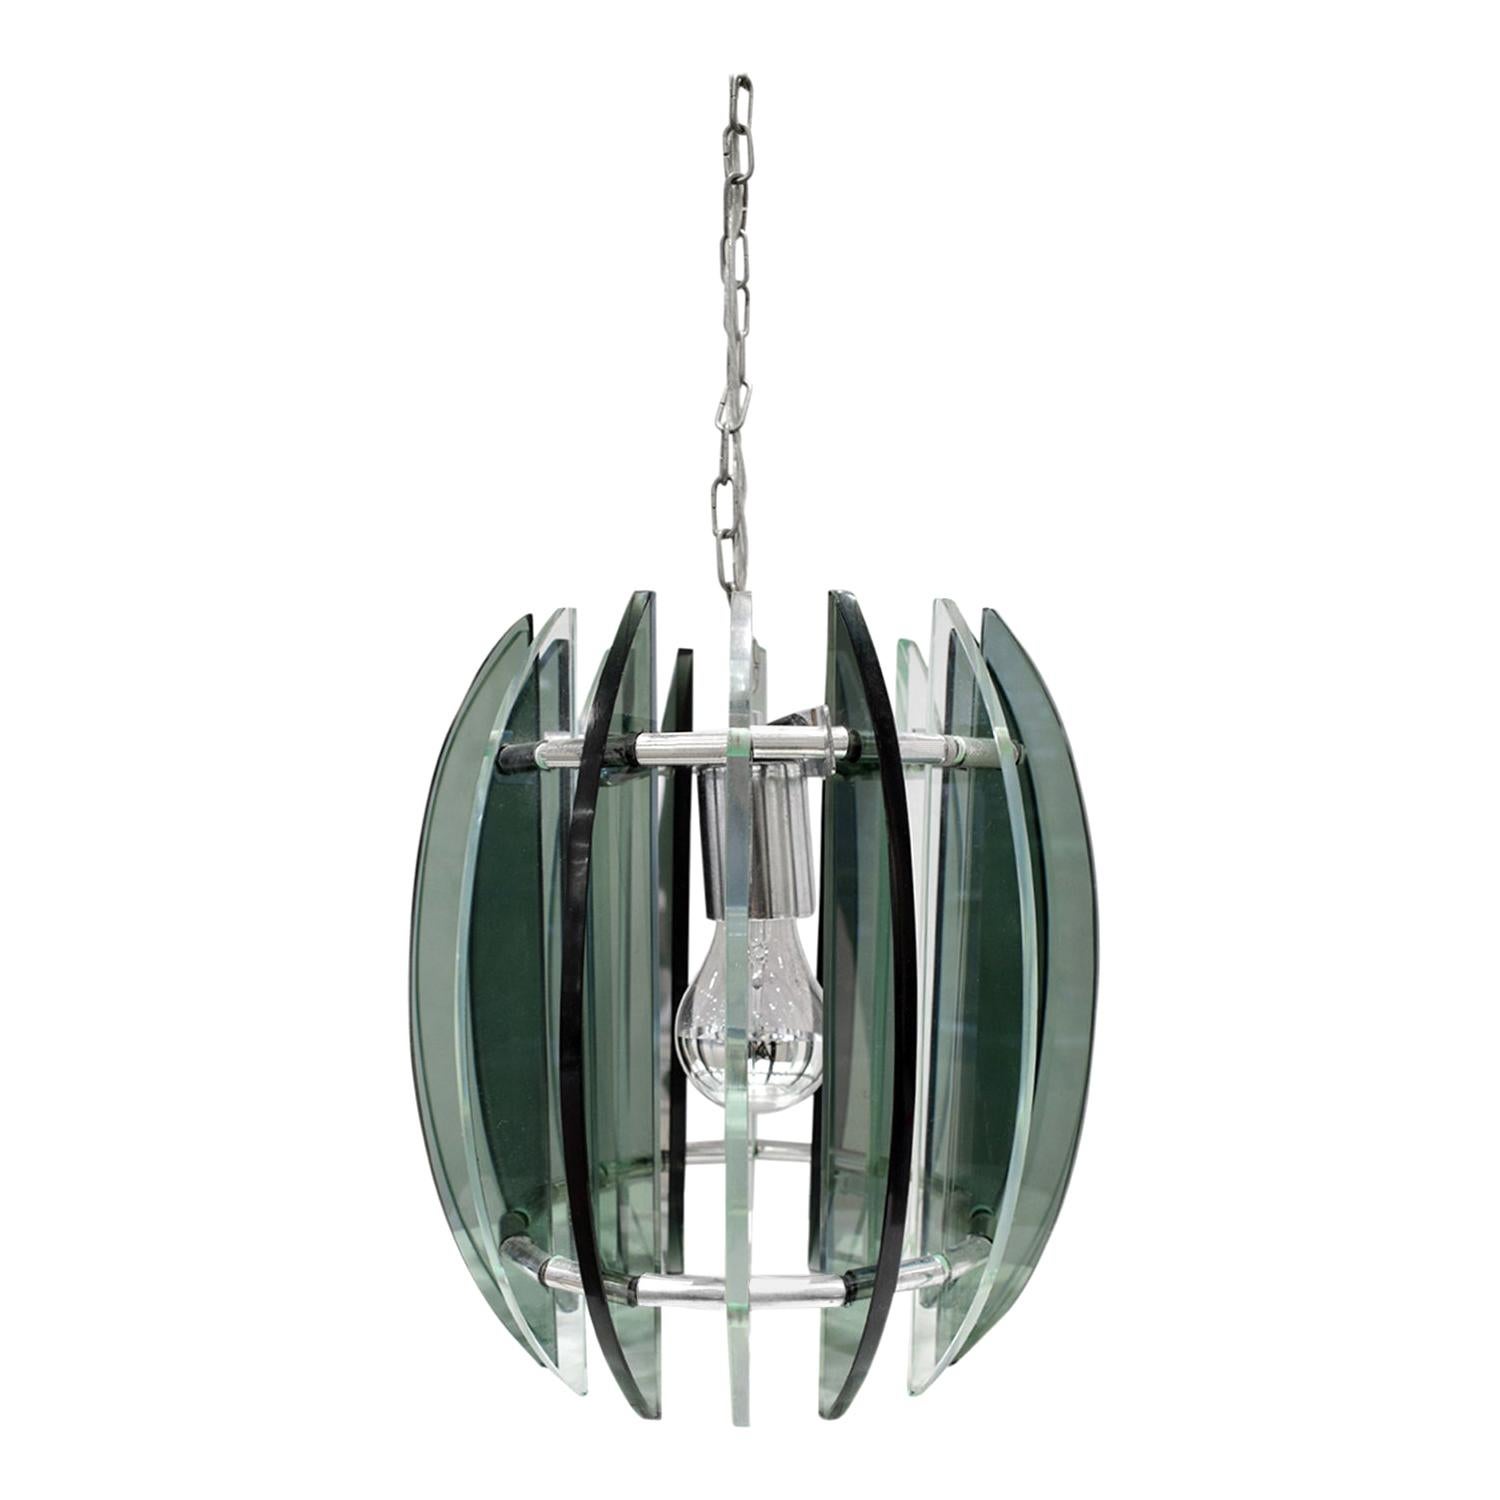 Chandelier in Chrome and Glass in the Style of Fontana Arte, 1970s